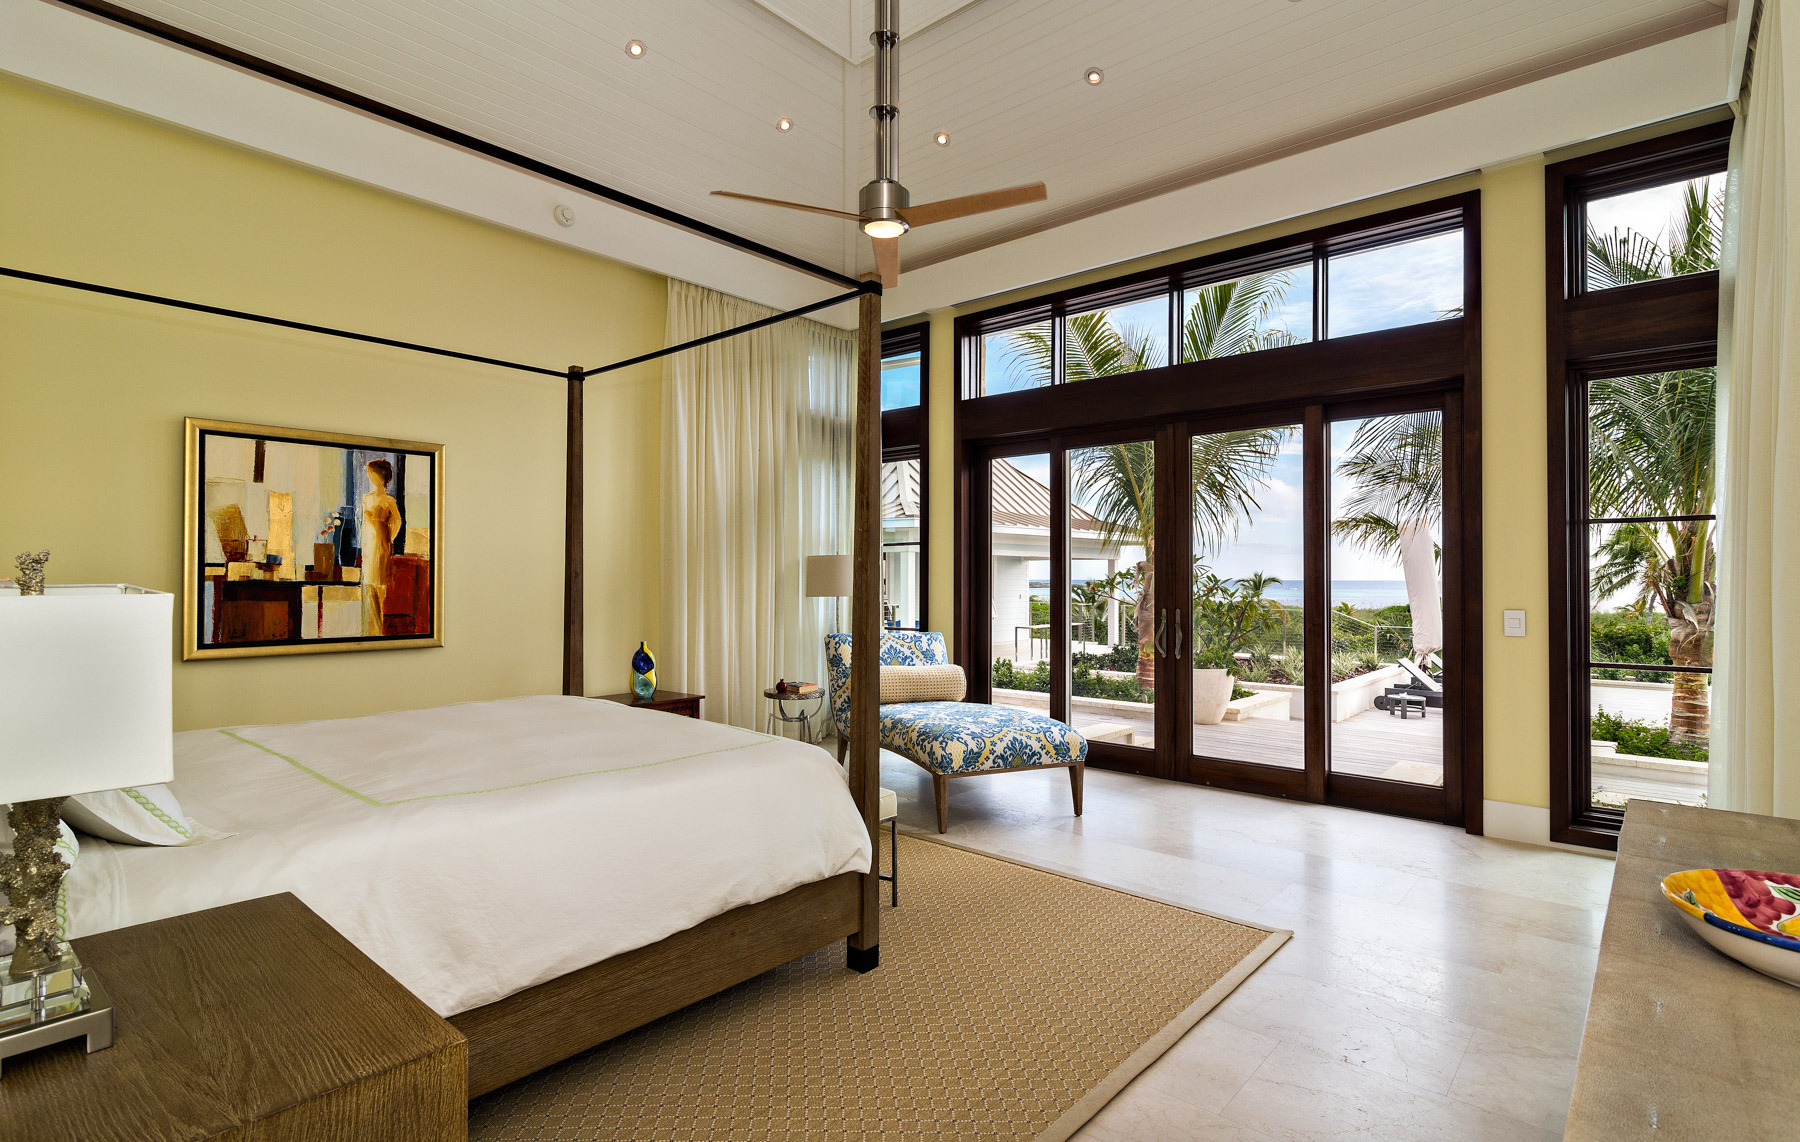 Master bedroom of a house in The Bahamas at The Abaco Club